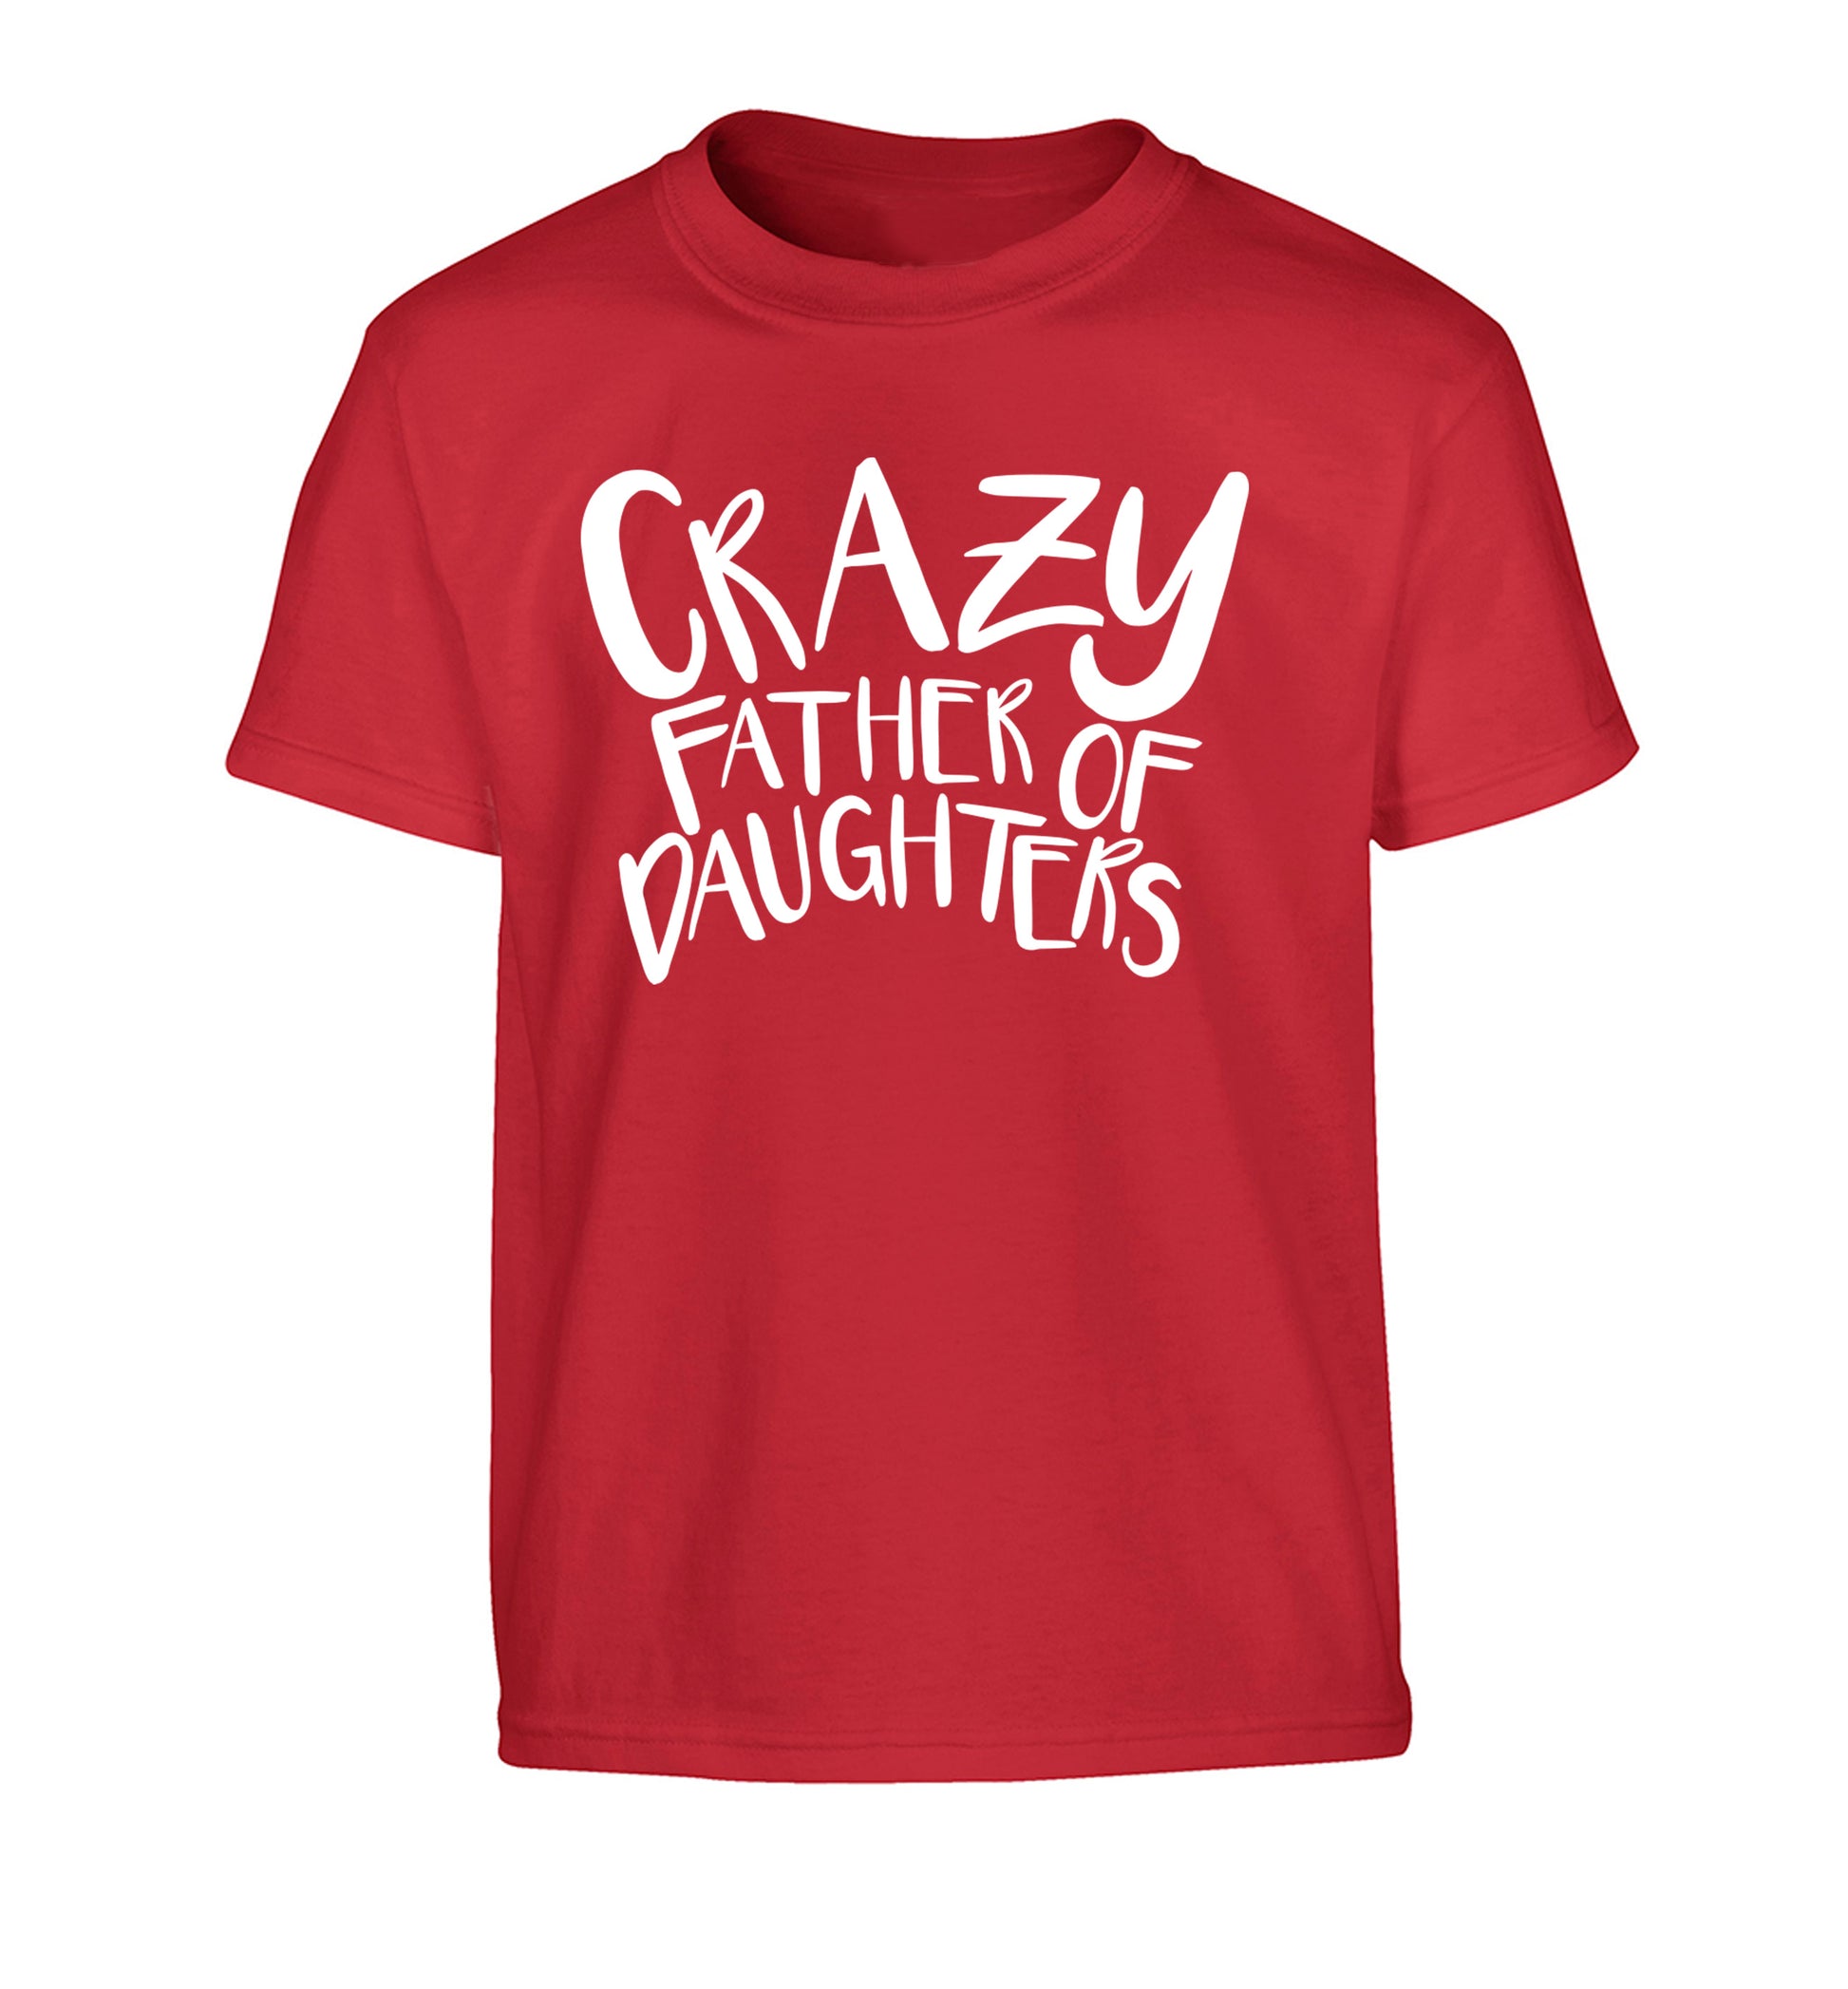 Crazy father of daughters Children's red Tshirt 12-13 Years